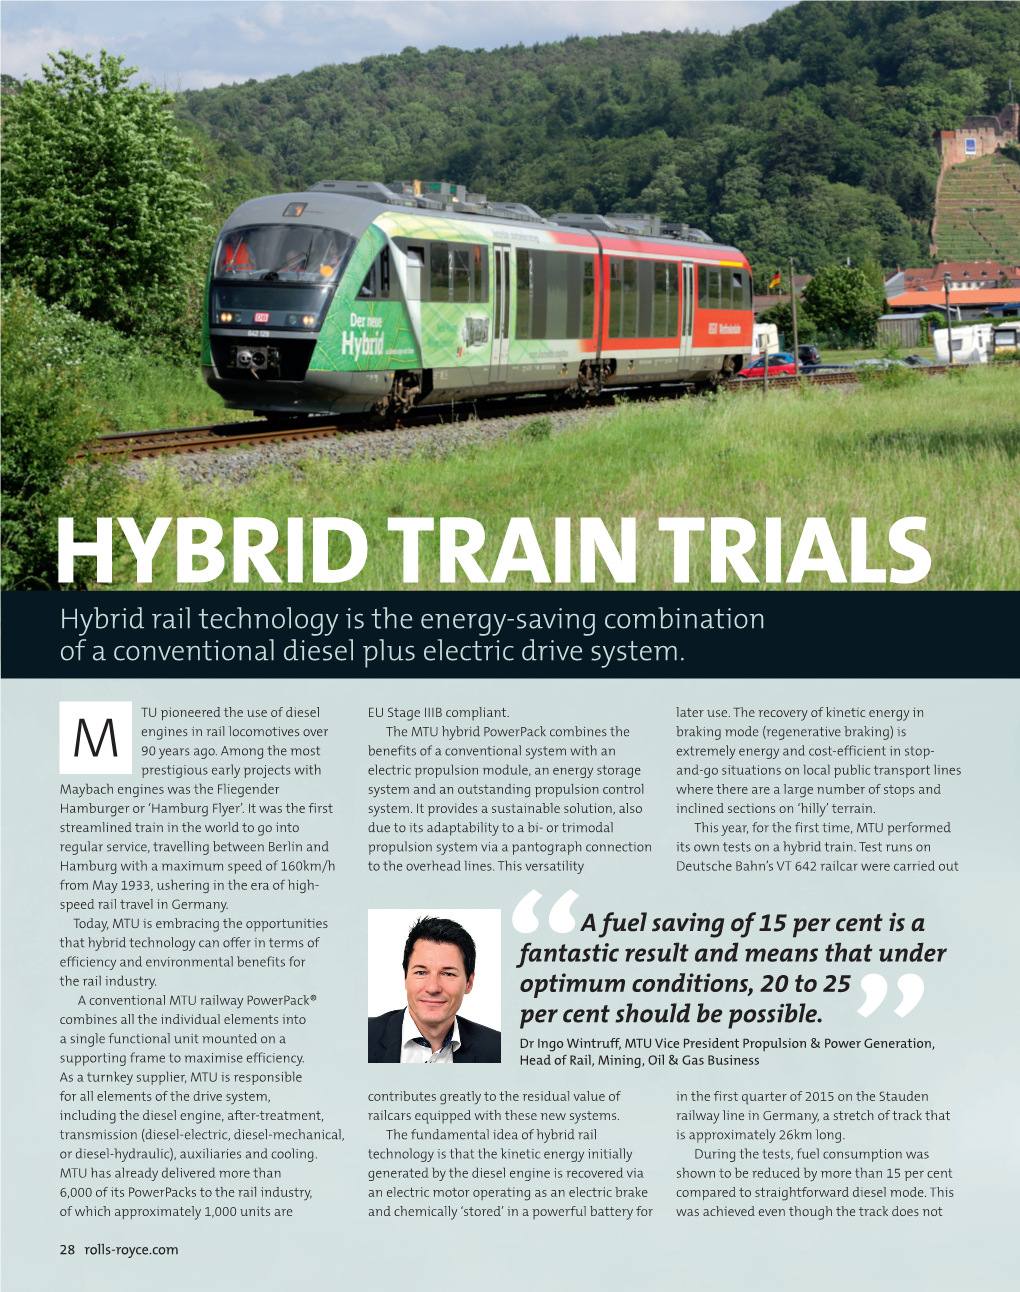 Hybrid Train Trials Hybrid Rail Technology Is the Energy-Saving Combination of a Conventional Diesel Plus Electric Drive System